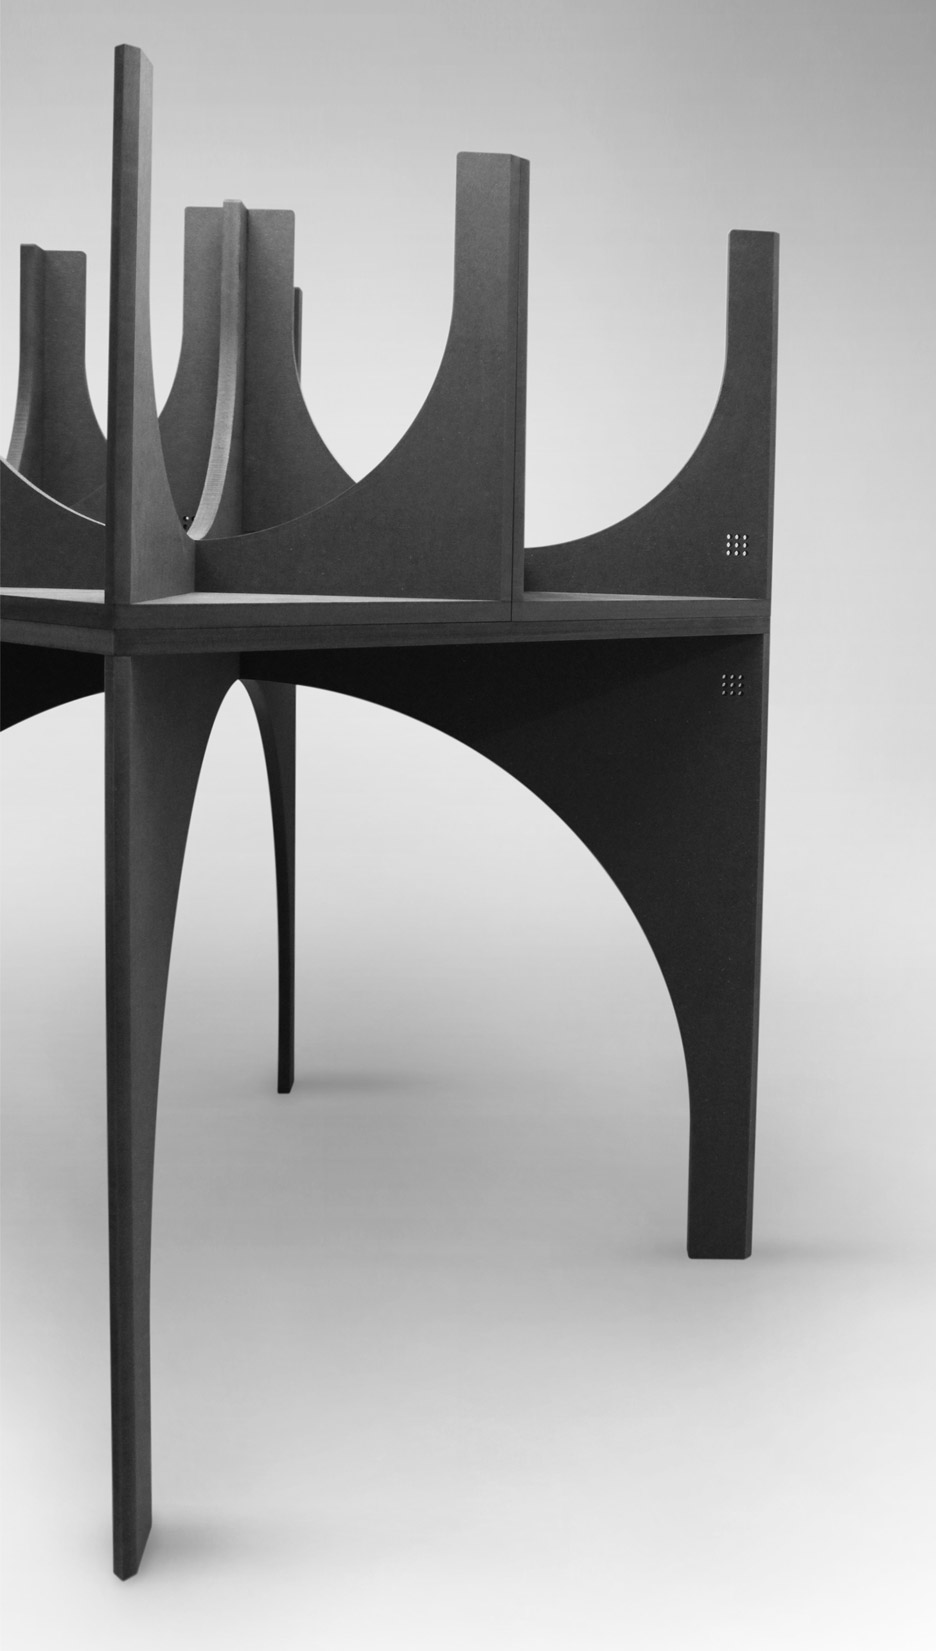 Table and stools based on architectural cross vaults by Graft Object